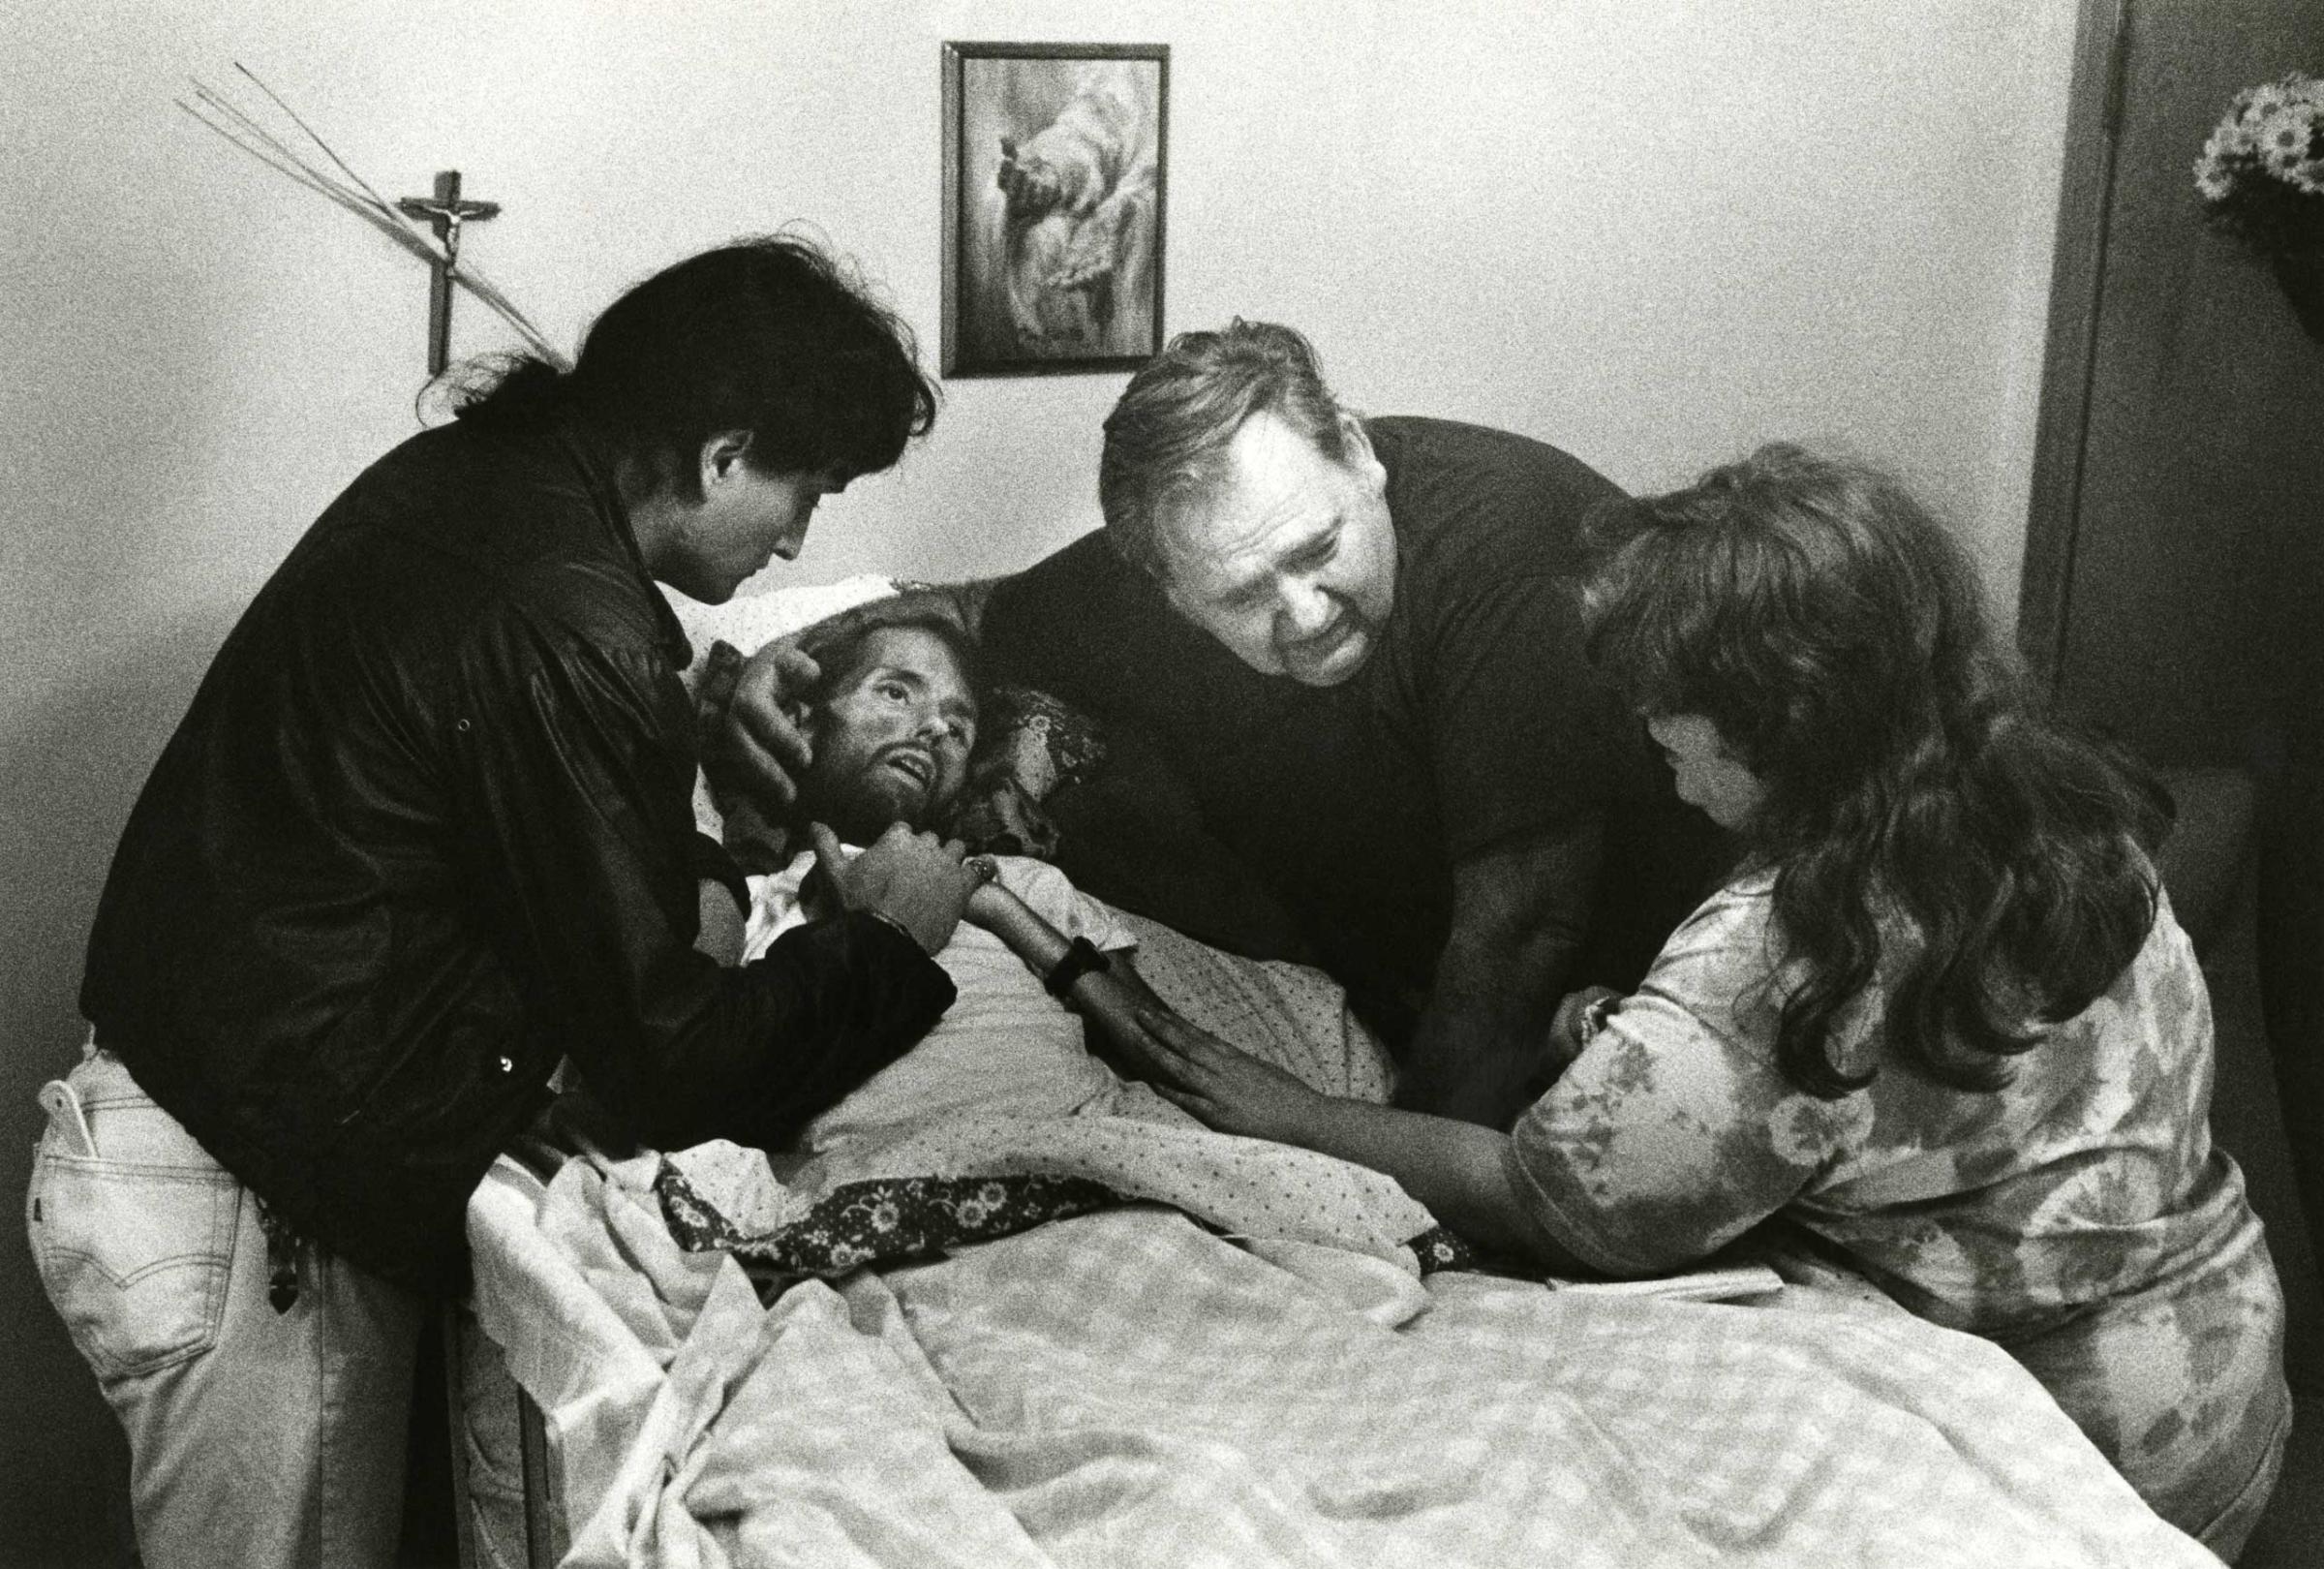 In another of Therese Frare's photos taken in the final moments of David Kirby's life, his caregiver and friend, Peta; David's father; and David's sister, Susan, say goodbye.